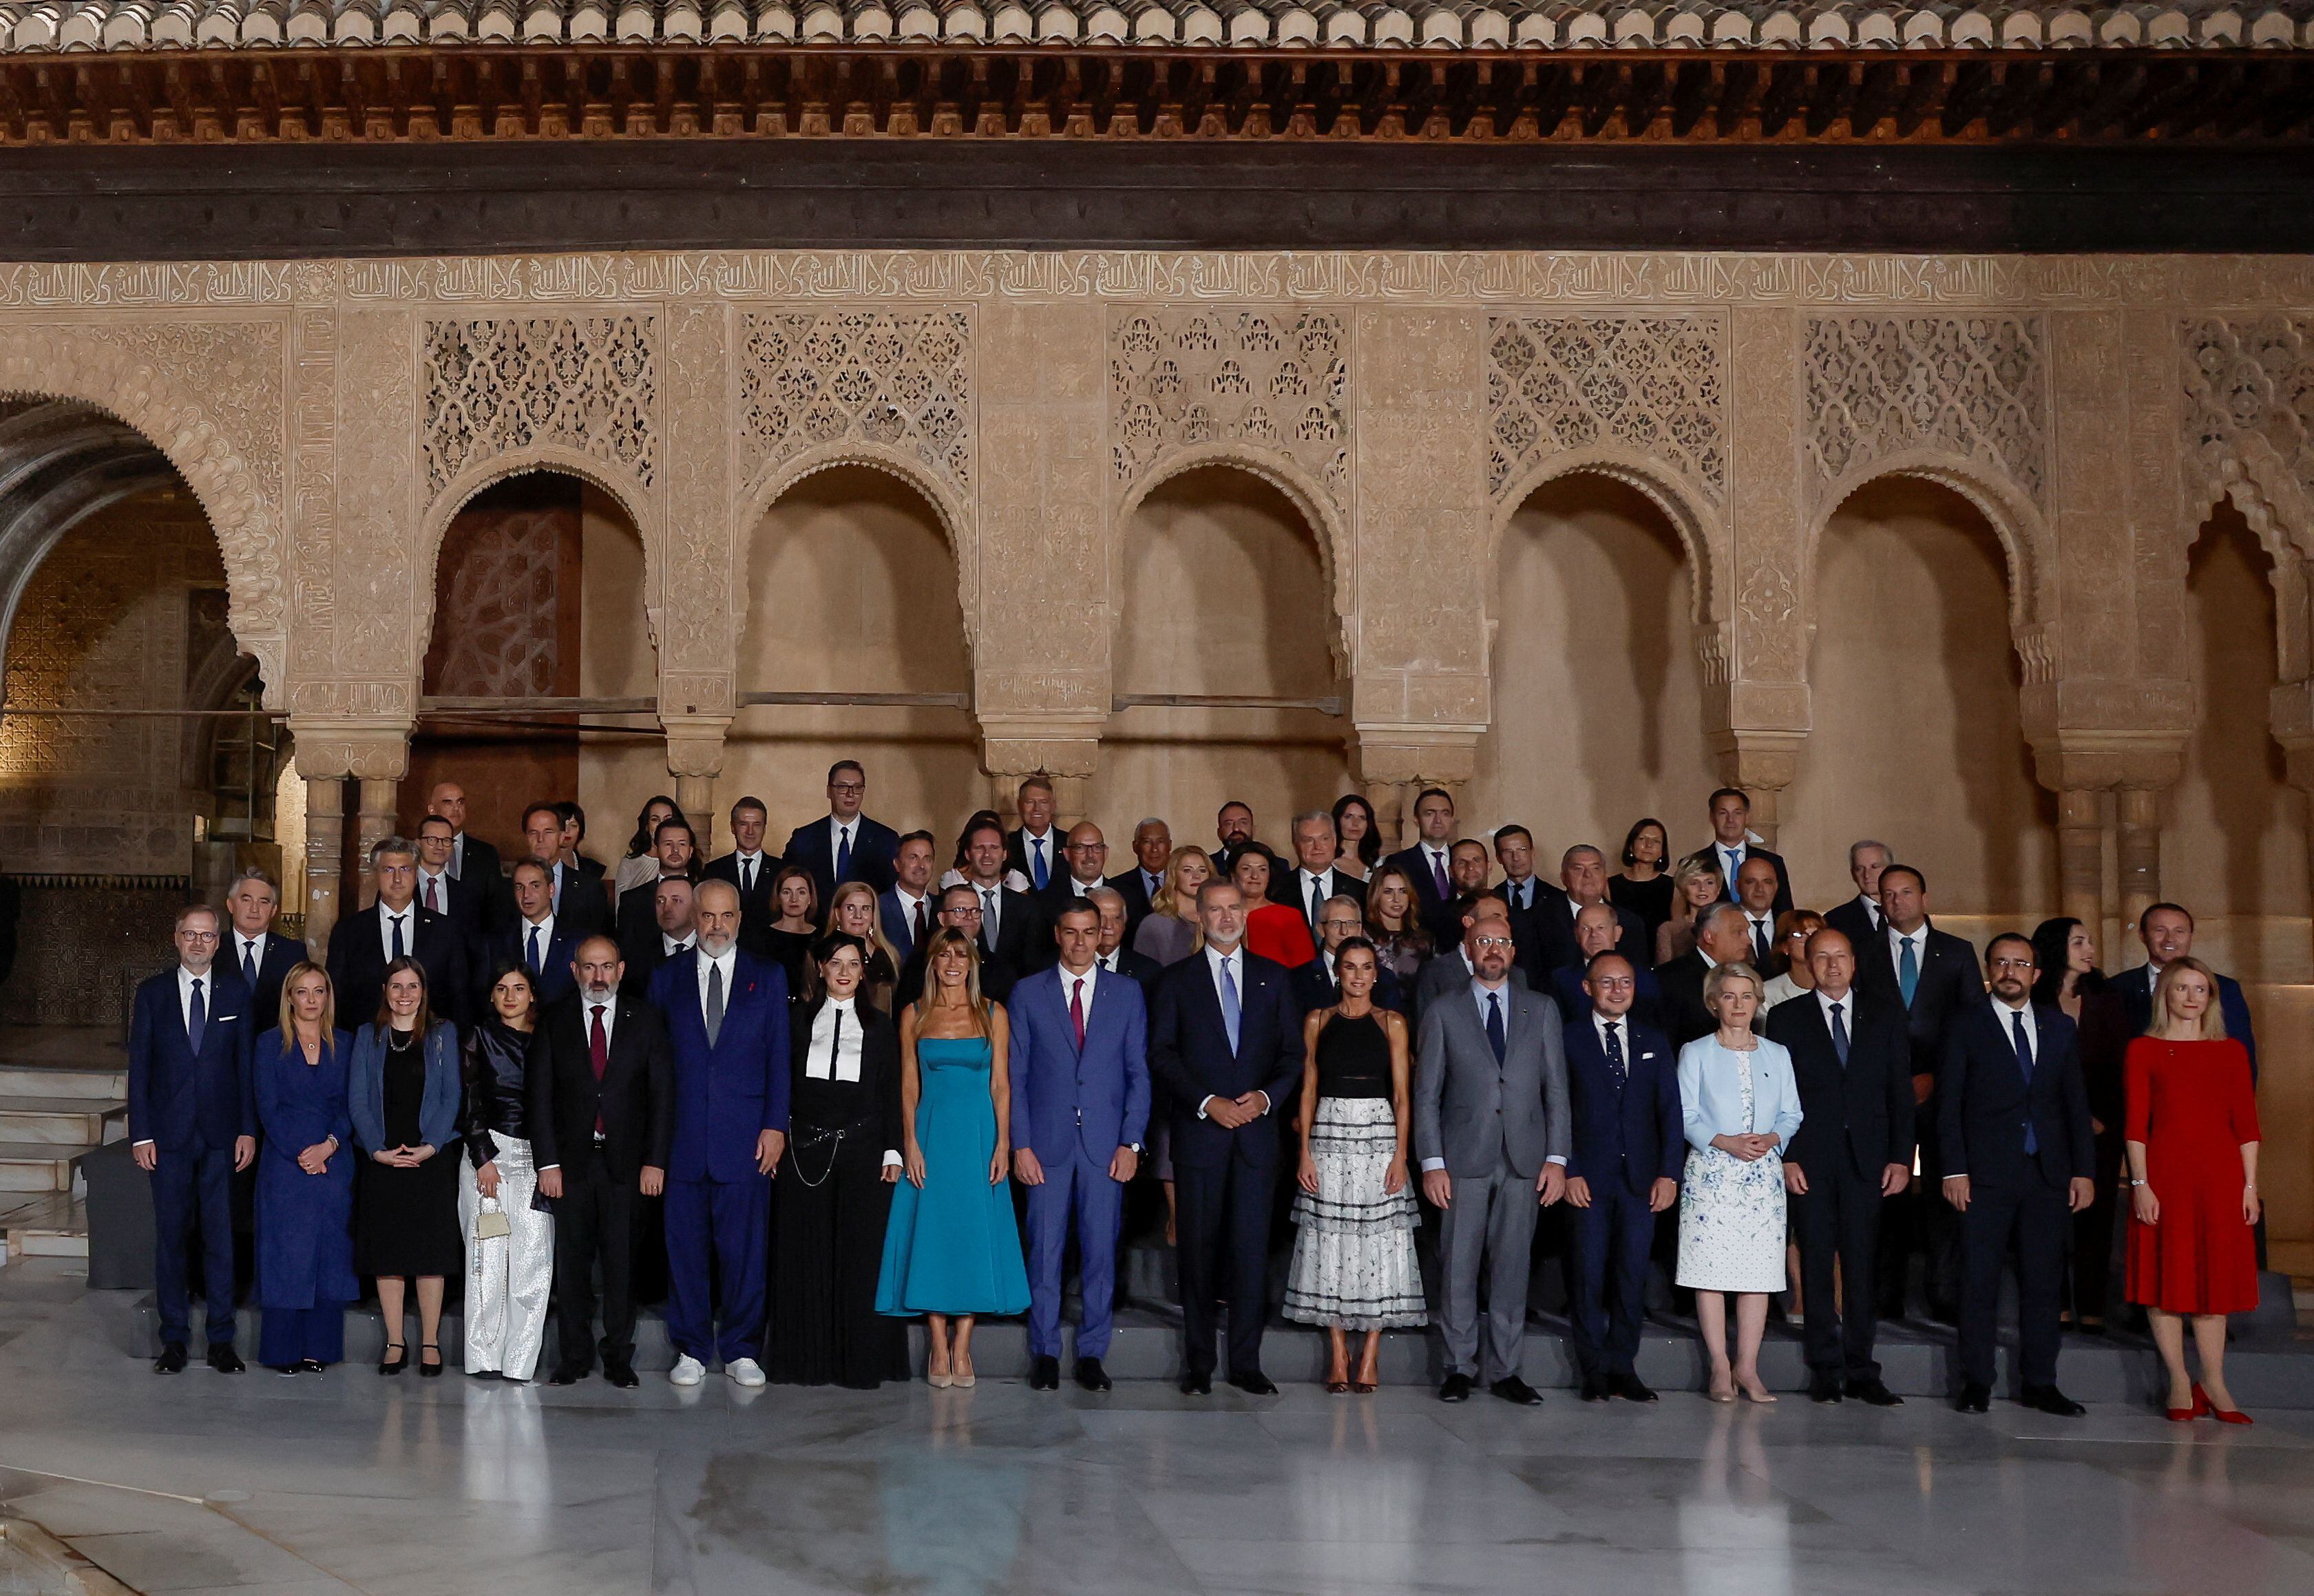 King Felipe VI of Spain, Queen Letizia and European leaders take a family photo during a visit to the Court of the Lions in the Alhambra, on the day of the European Political Community summit in Granada (Reuters/John Nazca)